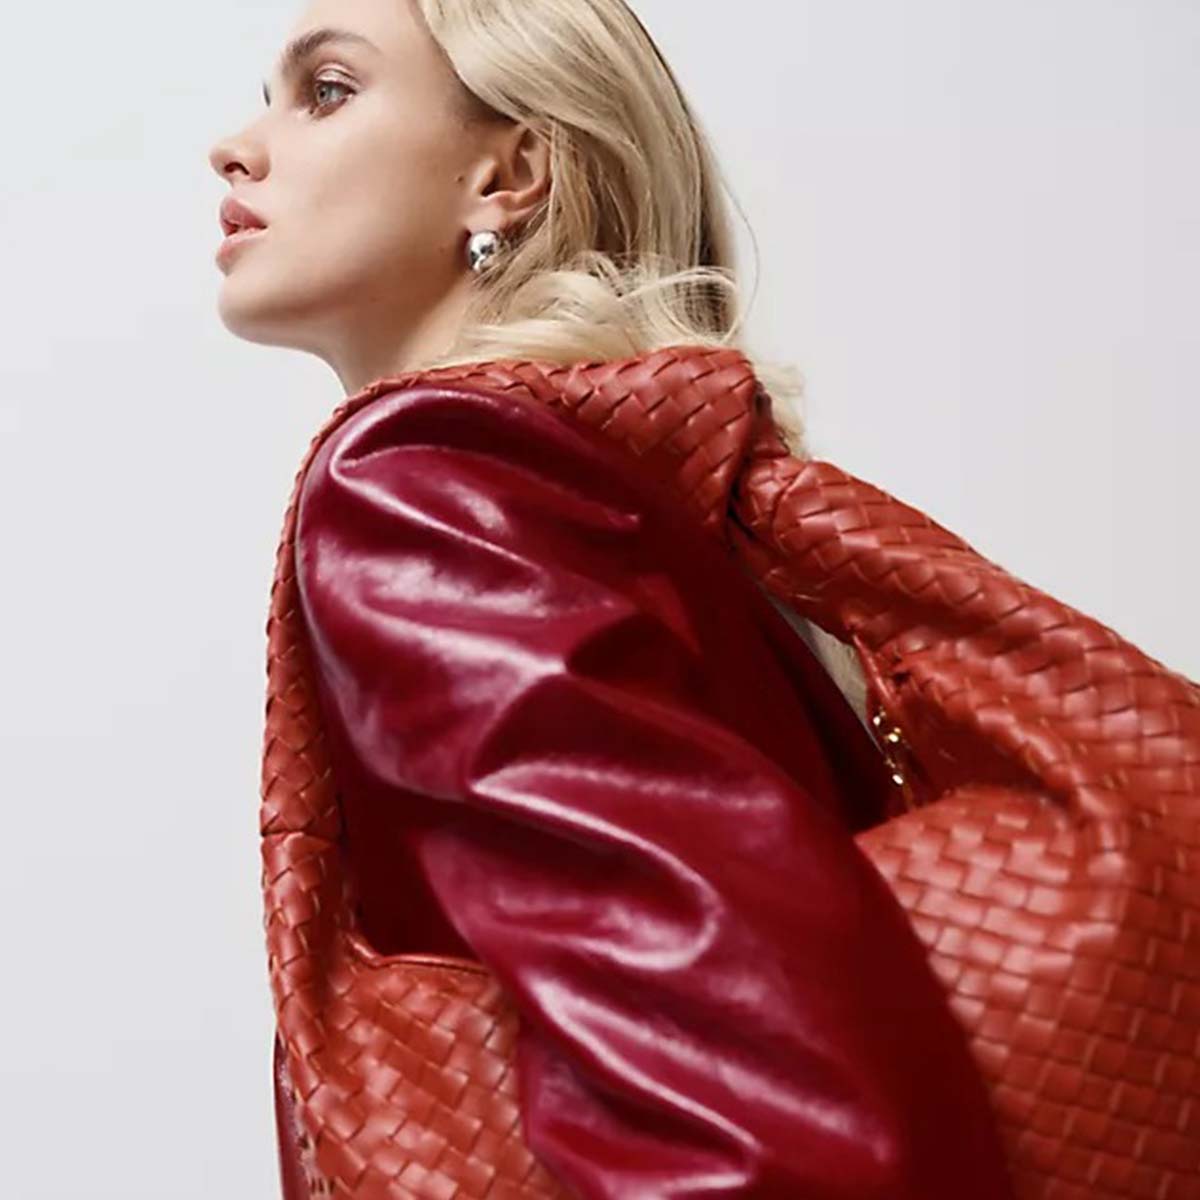 We're obsessed with the viral COS quilted bag, and so is TikTok